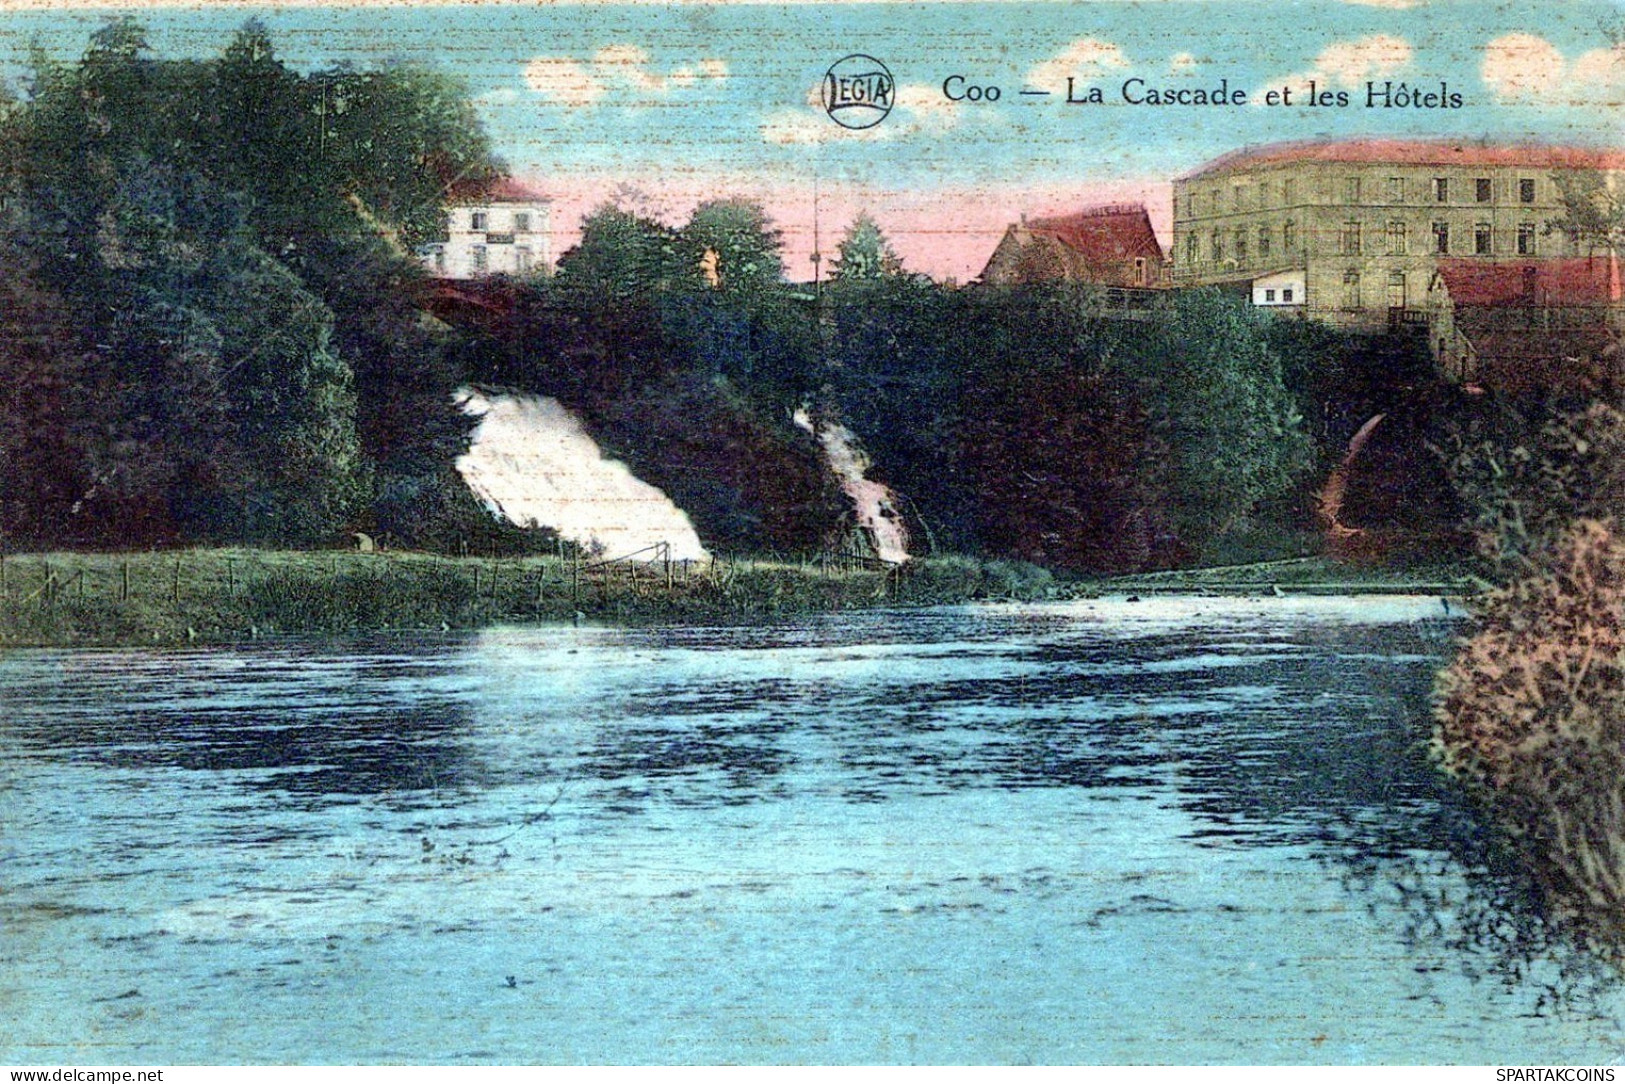 BELGIUM COO WATERFALL Province Of Liège Postcard CPA #PAD011.A - Stavelot